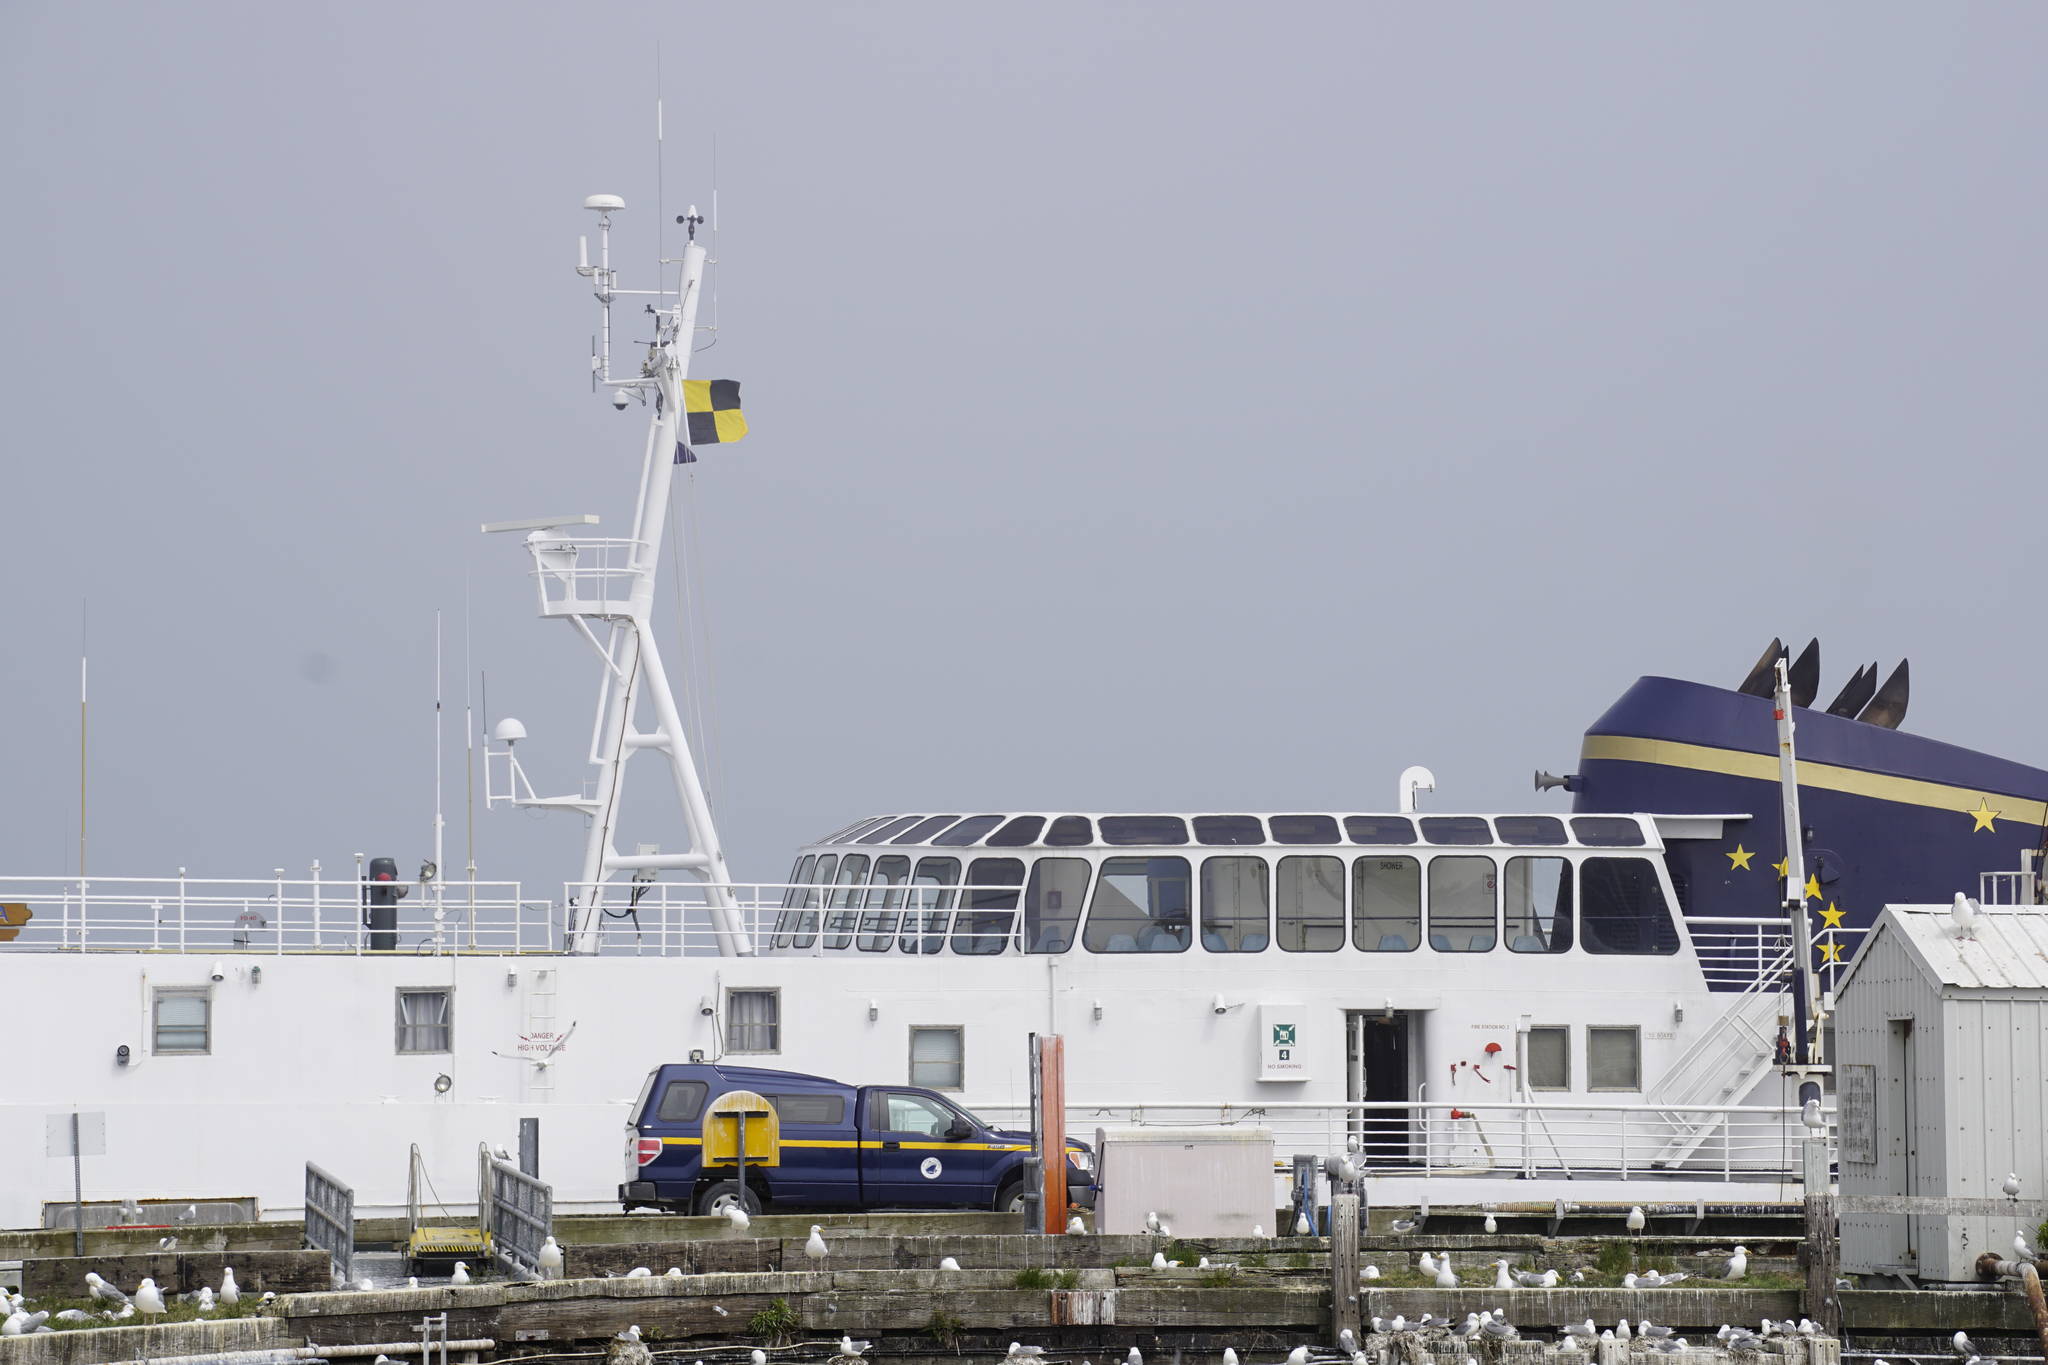 A quarantine or “Lima” flag of yellow-and-black flies from the M/V Tustumena on Friday, June 12, 2020, at the Pioneer Dock in Homer, Alaska. Seven crew members tested positive for COVID-19, and as of Friday three of them remained quarantined on the state ferry. (Photo by Michael Armstrong/Homer News)